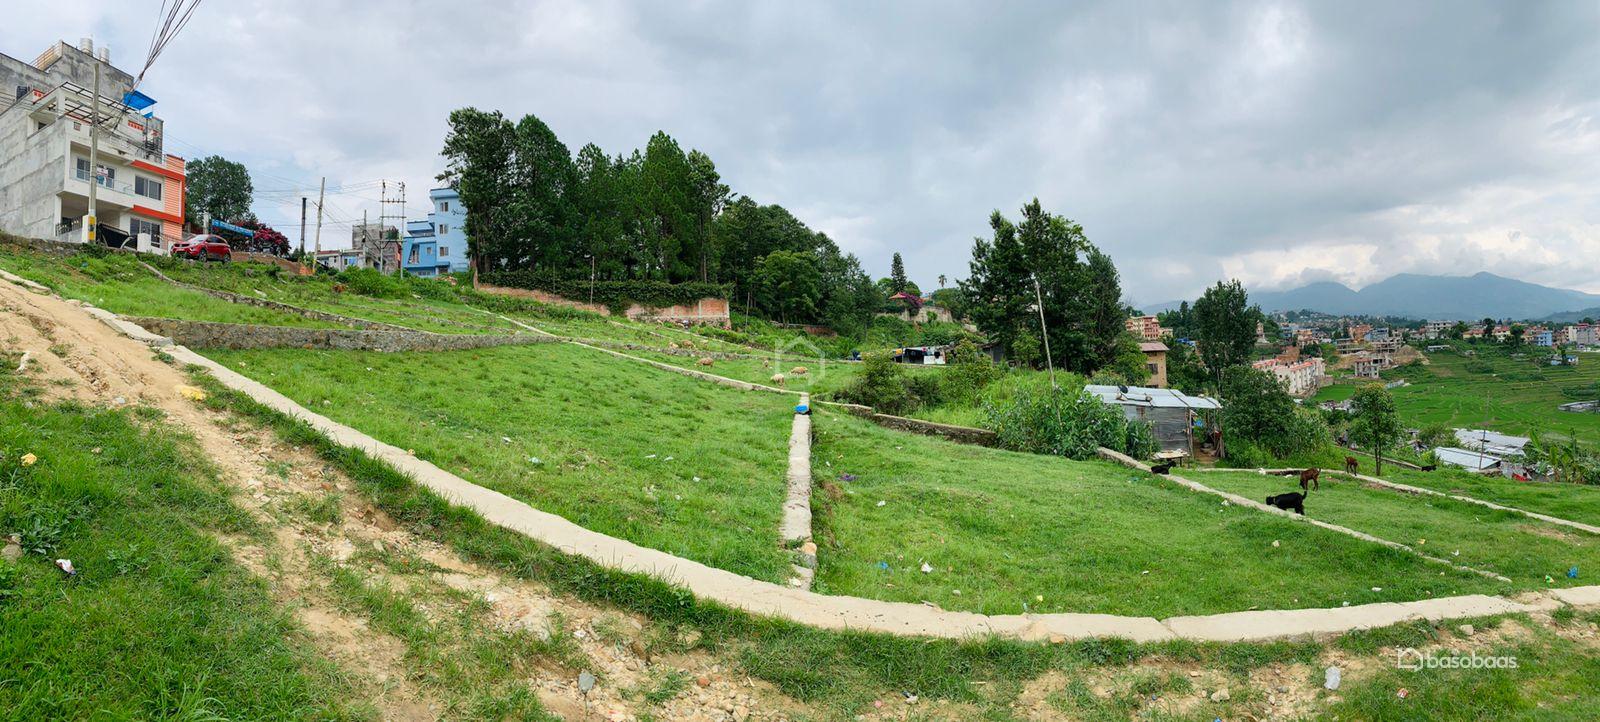 Residental Land : Land for Sale in Bhaisepati, Lalitpur Image 3